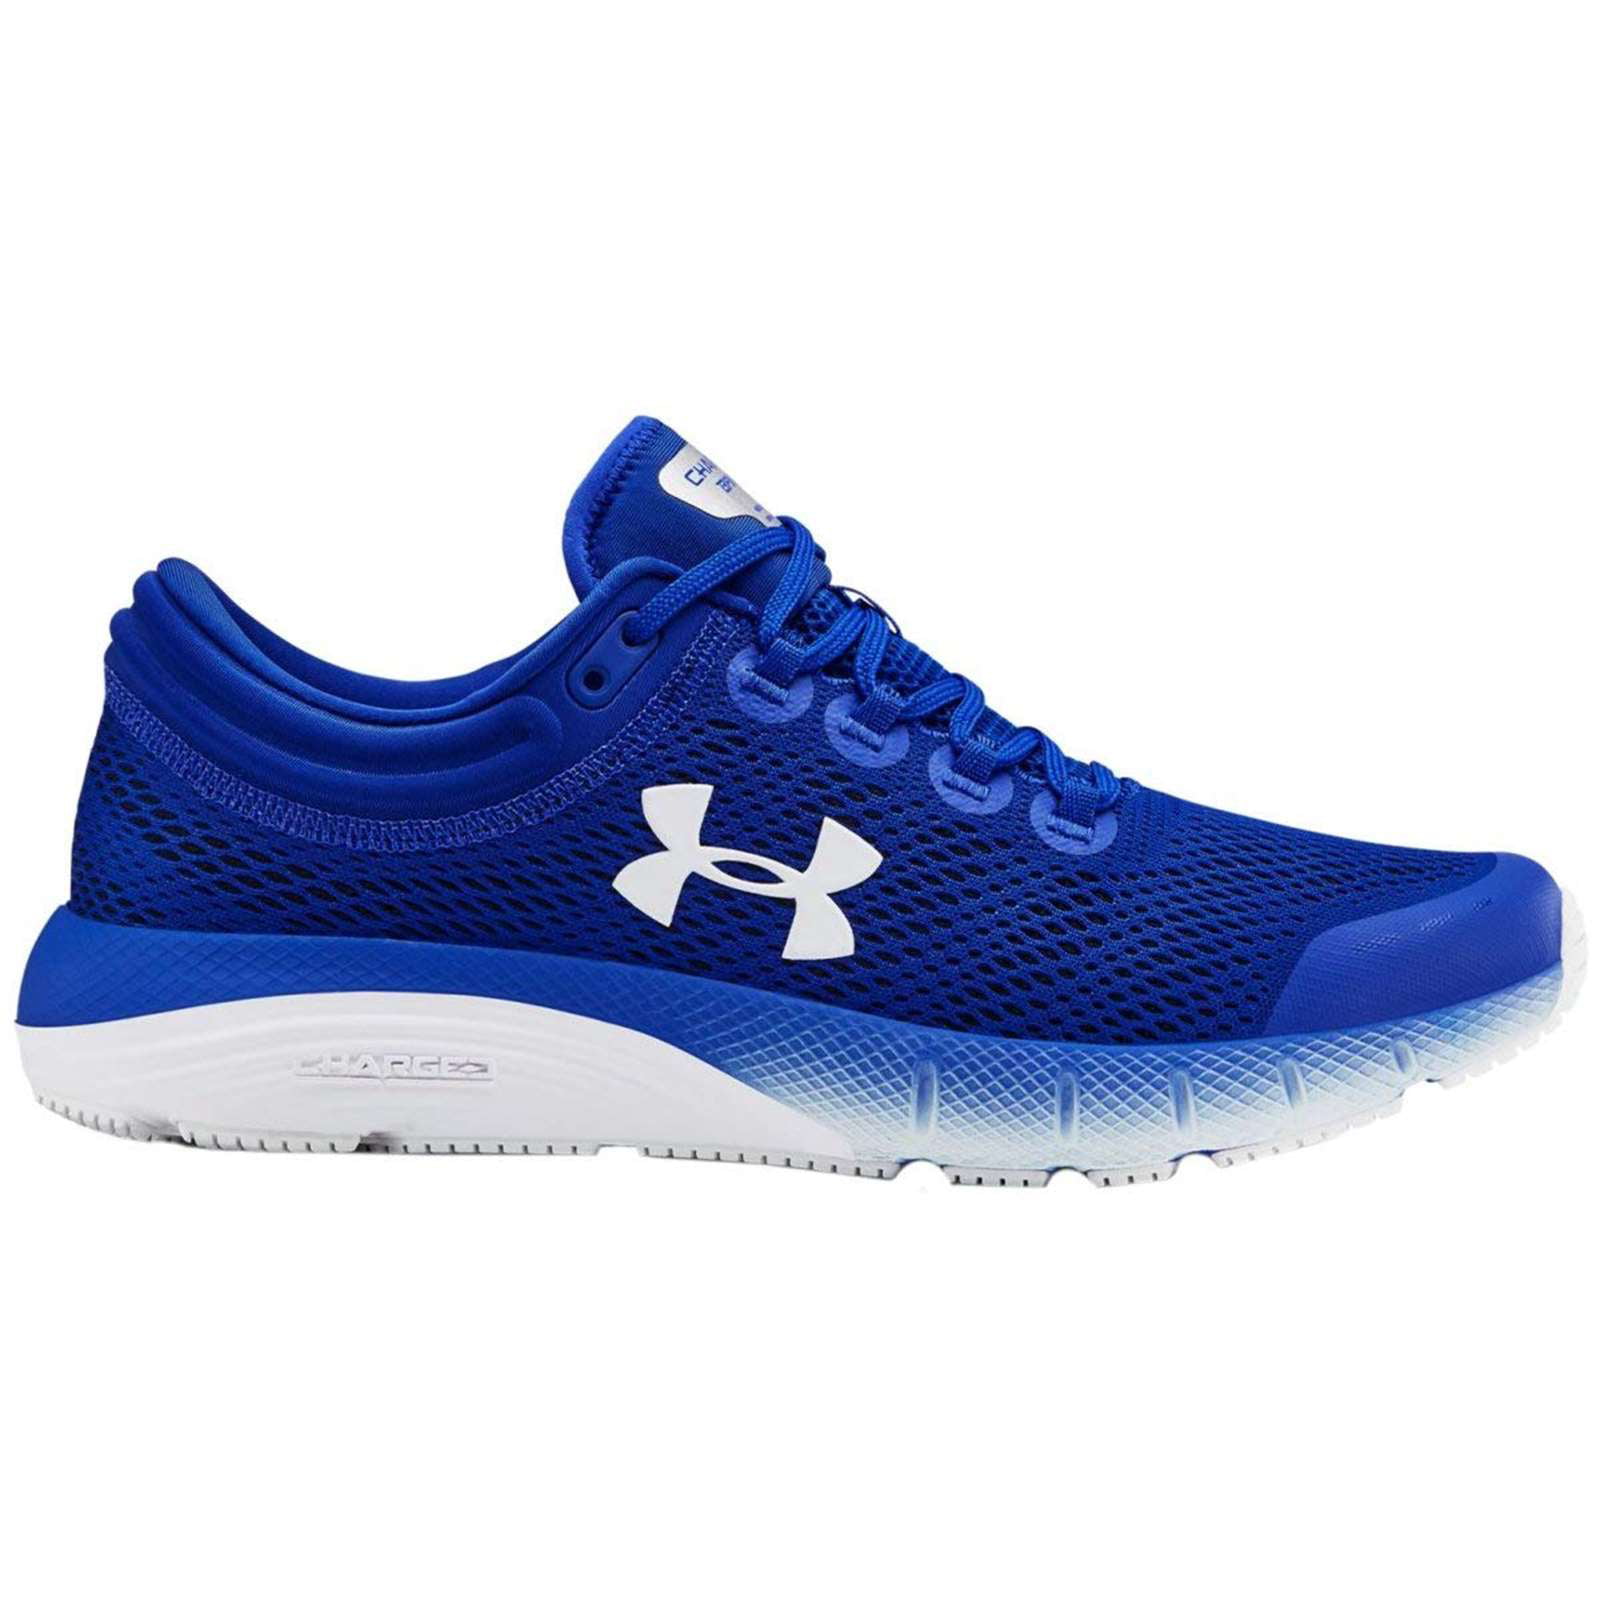 Under Armour Charged Bandit 5 Mens Running Shoes Blue 